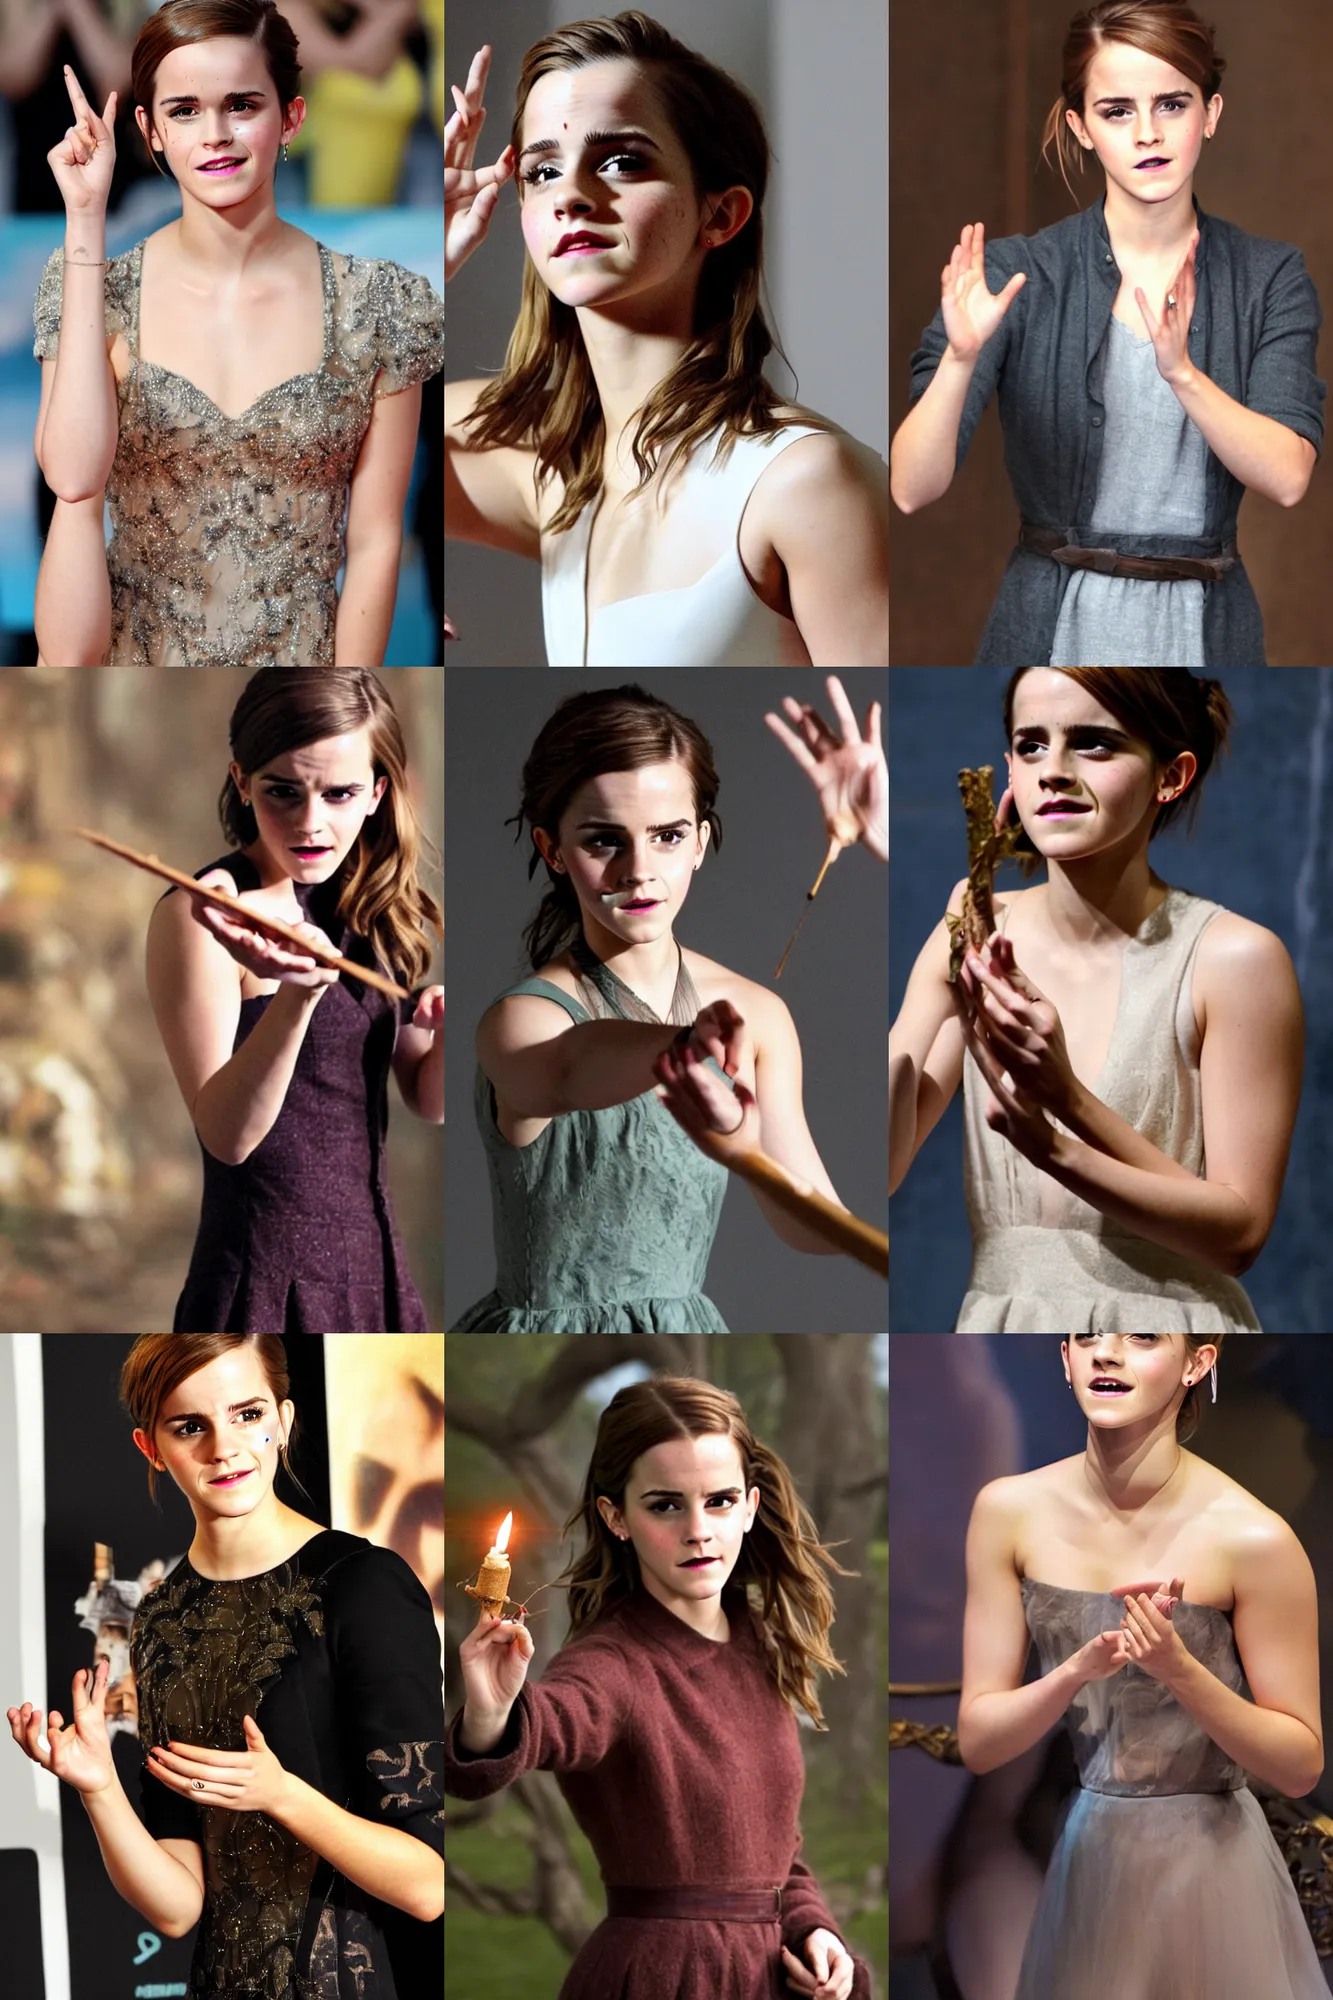 Prompt: A photo of Emma Watson casting a magical spell